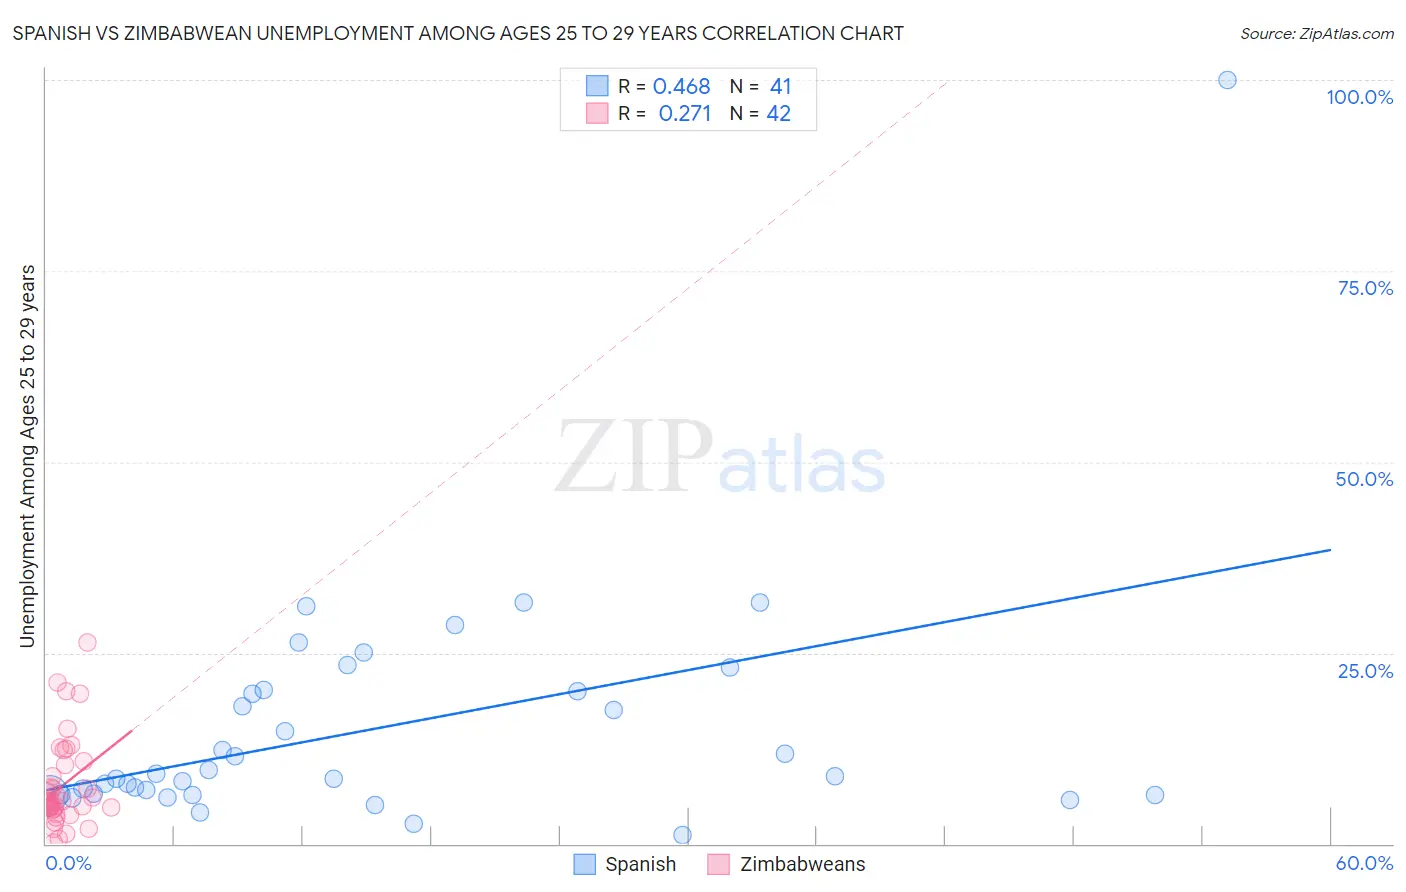 Spanish vs Zimbabwean Unemployment Among Ages 25 to 29 years